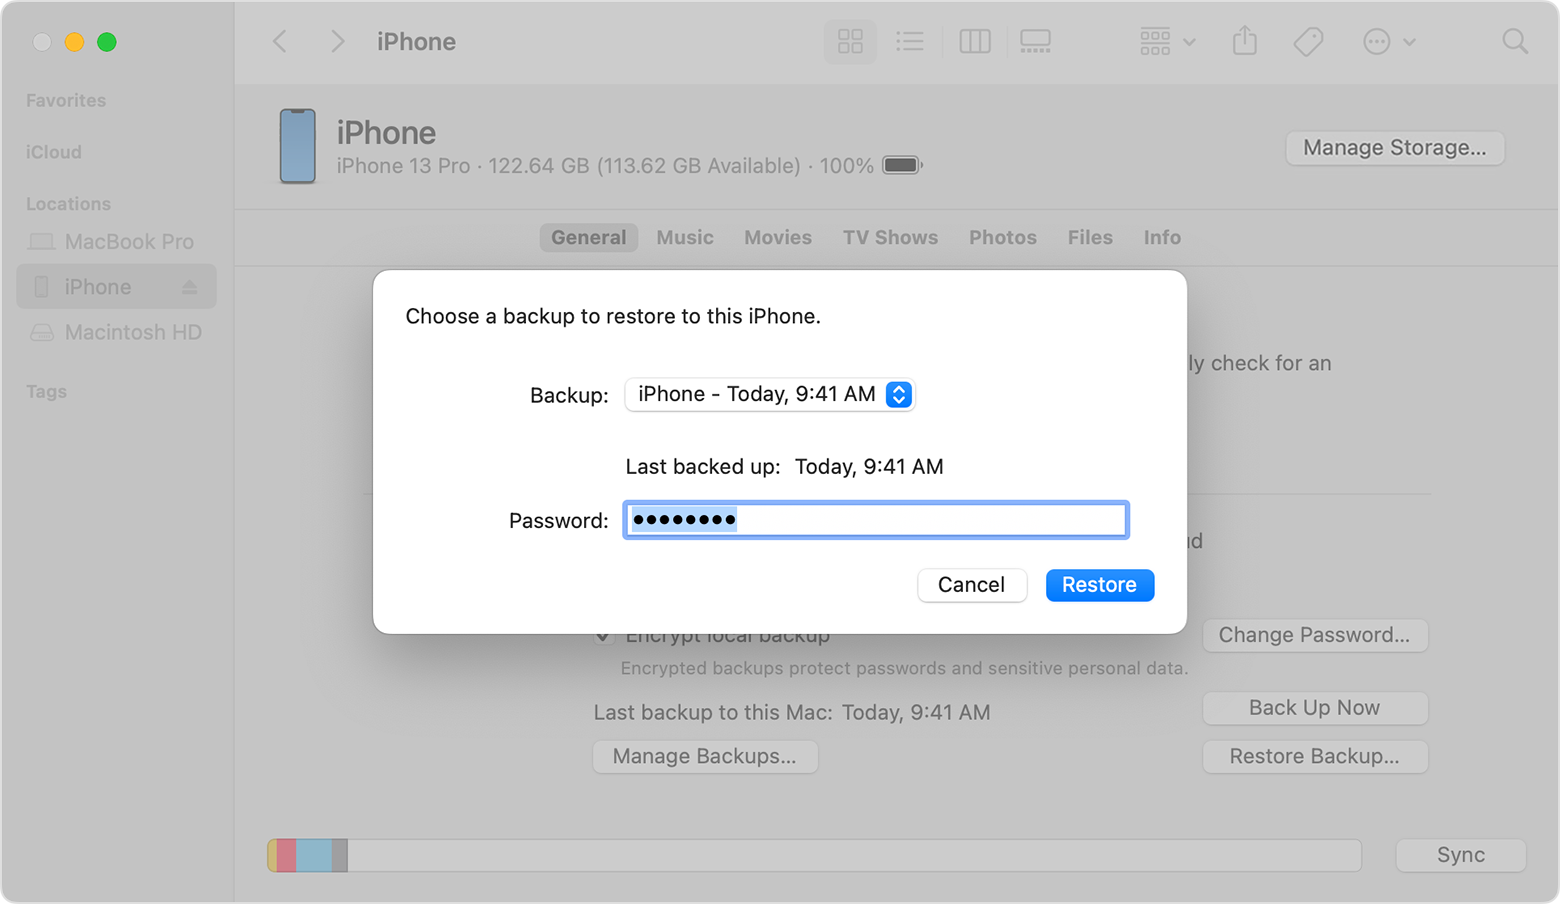 A Finder window with a prompt to choose a backup and enter your password.